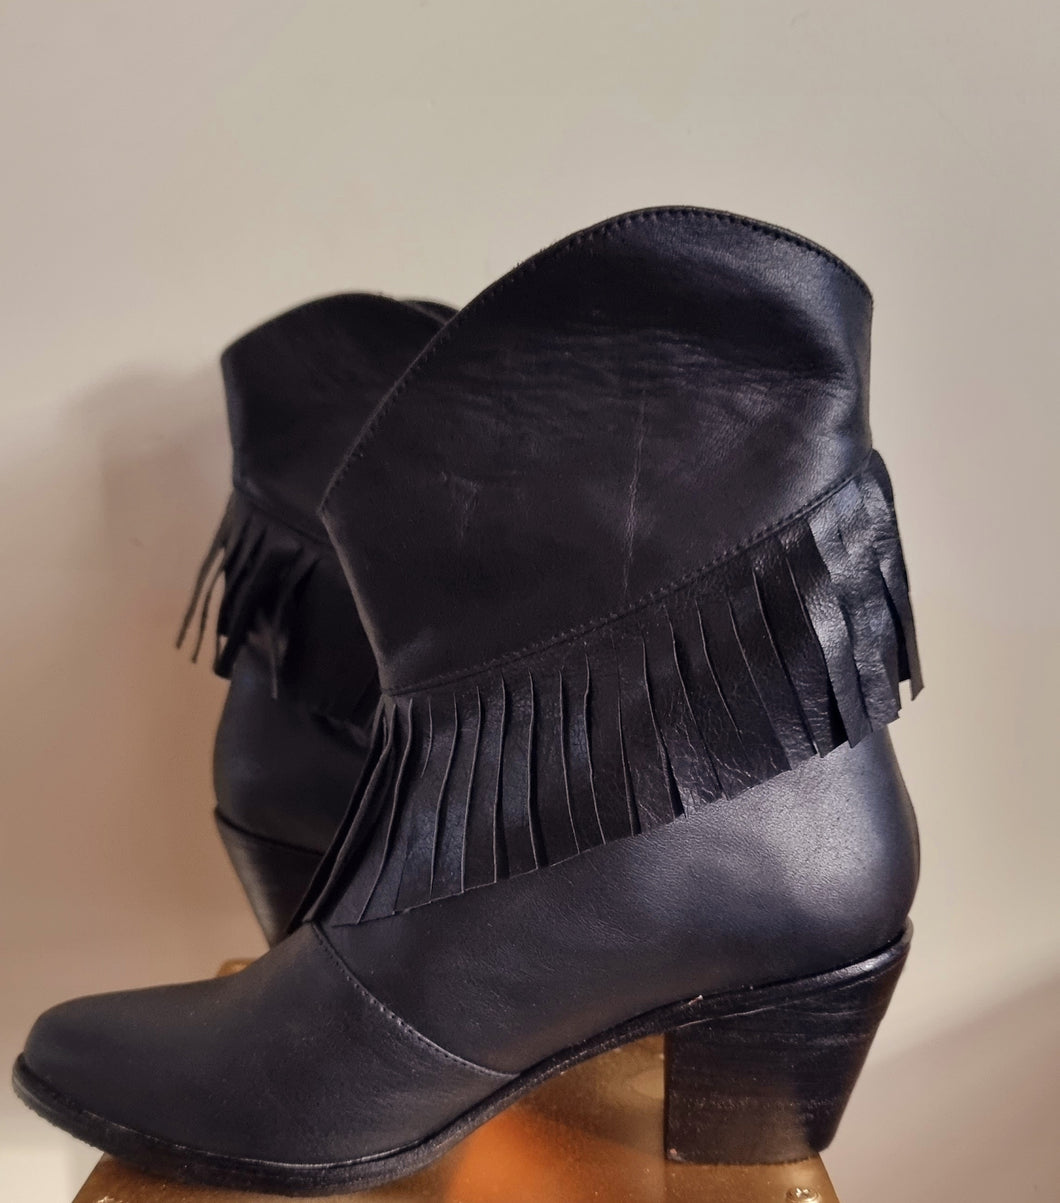 Fringed Midnight Boots, Ankle Boots, Alluring Fringed Detailing, Handmade in Bali, Western Style,  Pre- order, Shop for a Cause, Support SMEs, Love Local, Sustainable Fashion, Sacred Circus, Black, Comfort, Stylish, Luxe, Staple in Every Fashion, Extra Edge, High-end, Premium, Adventure, Statement , Footwear, Sturdy, Leather material.